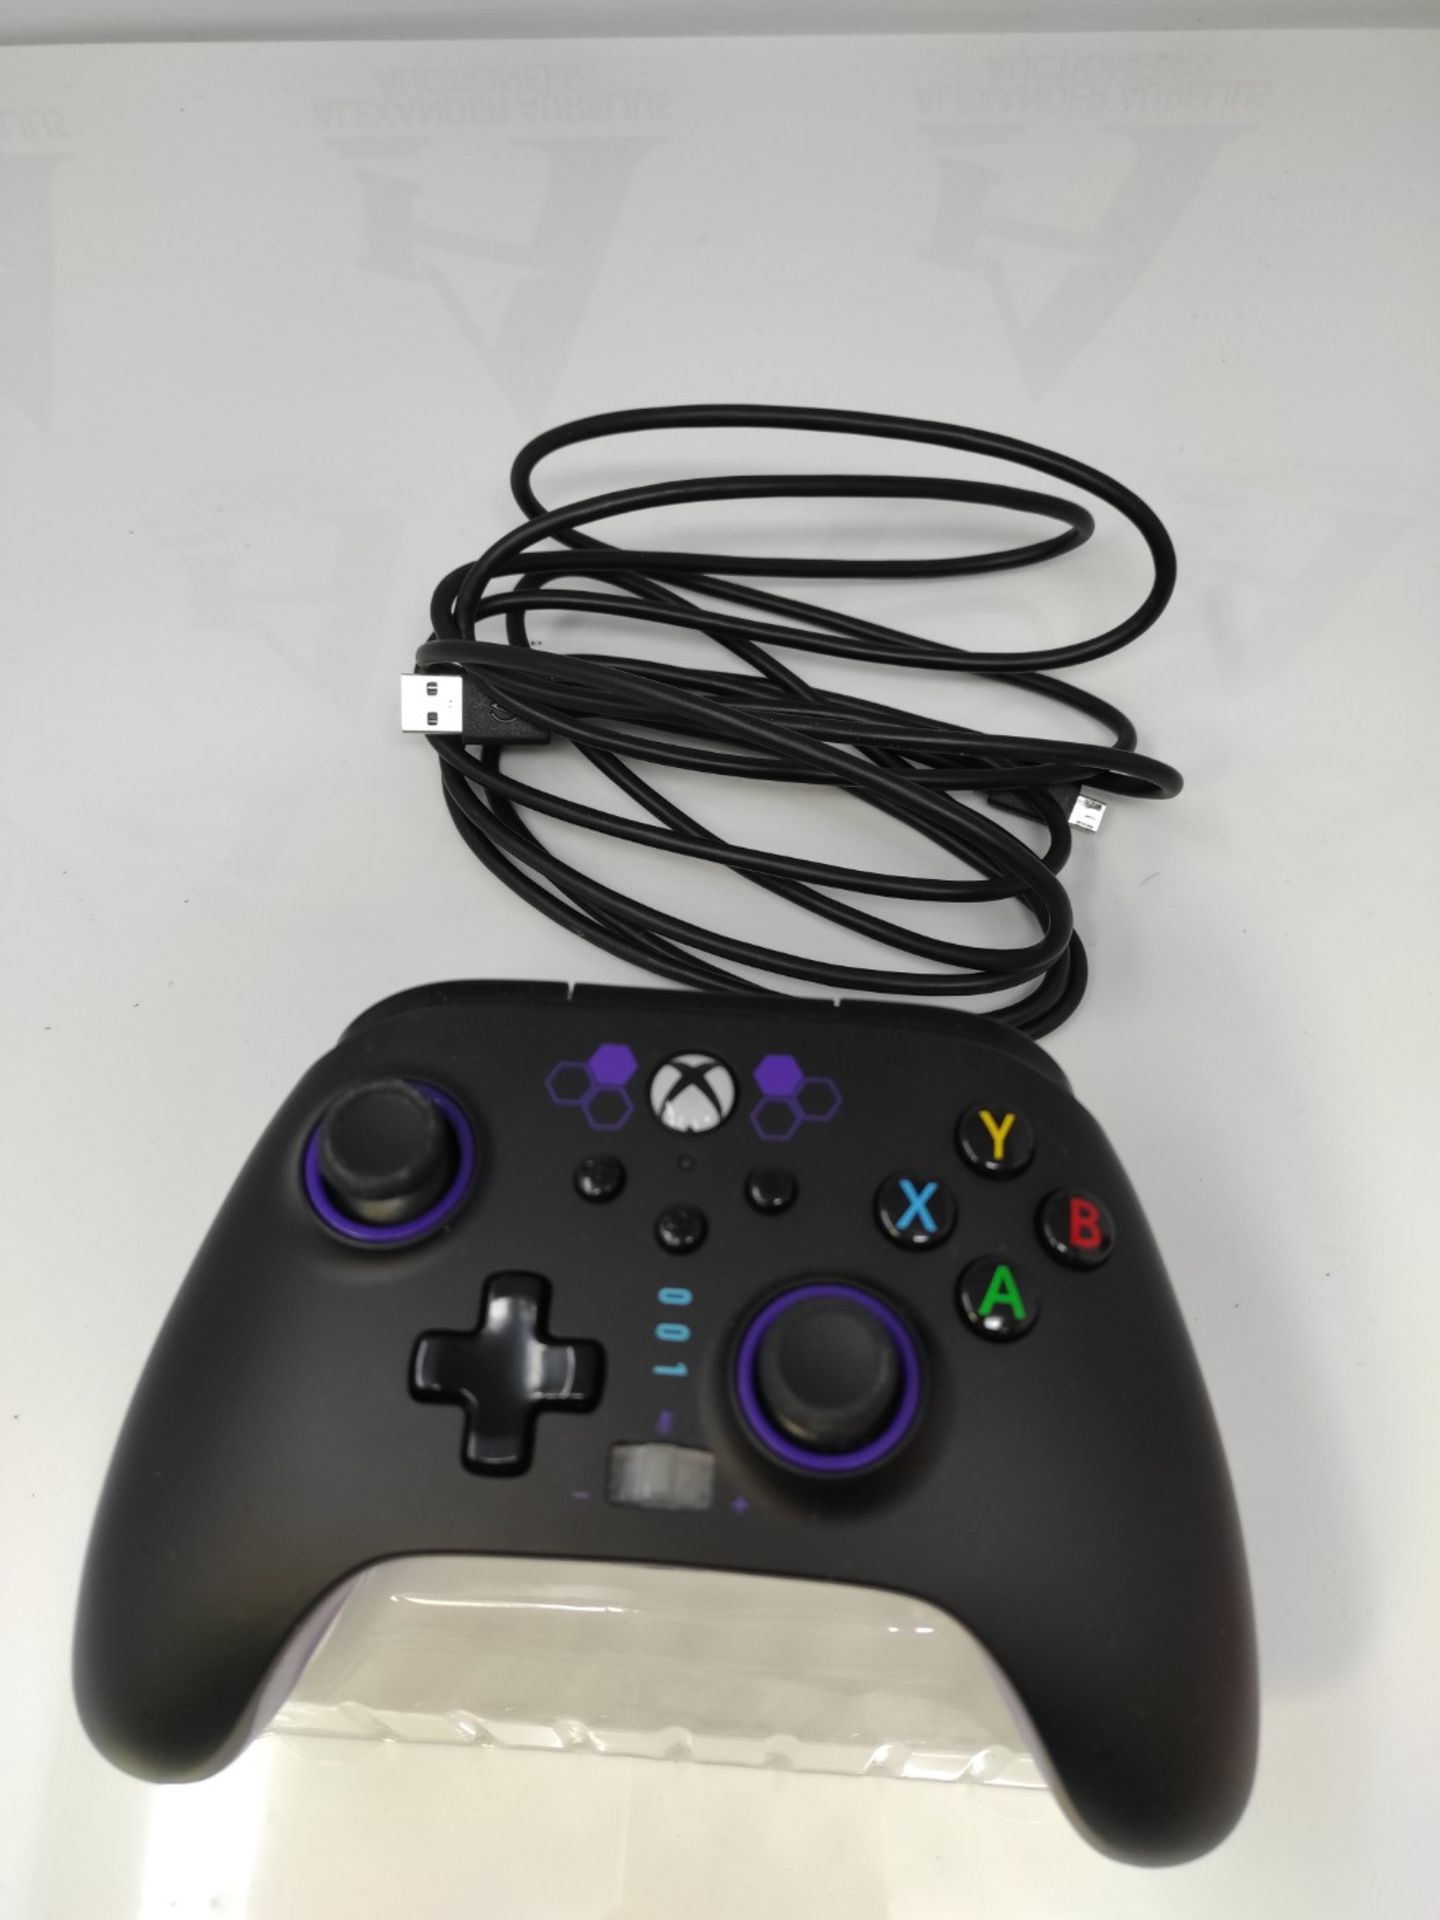 Advanced wired PowerA controller for Xbox Series X|S - Purple Hex - Image 3 of 3